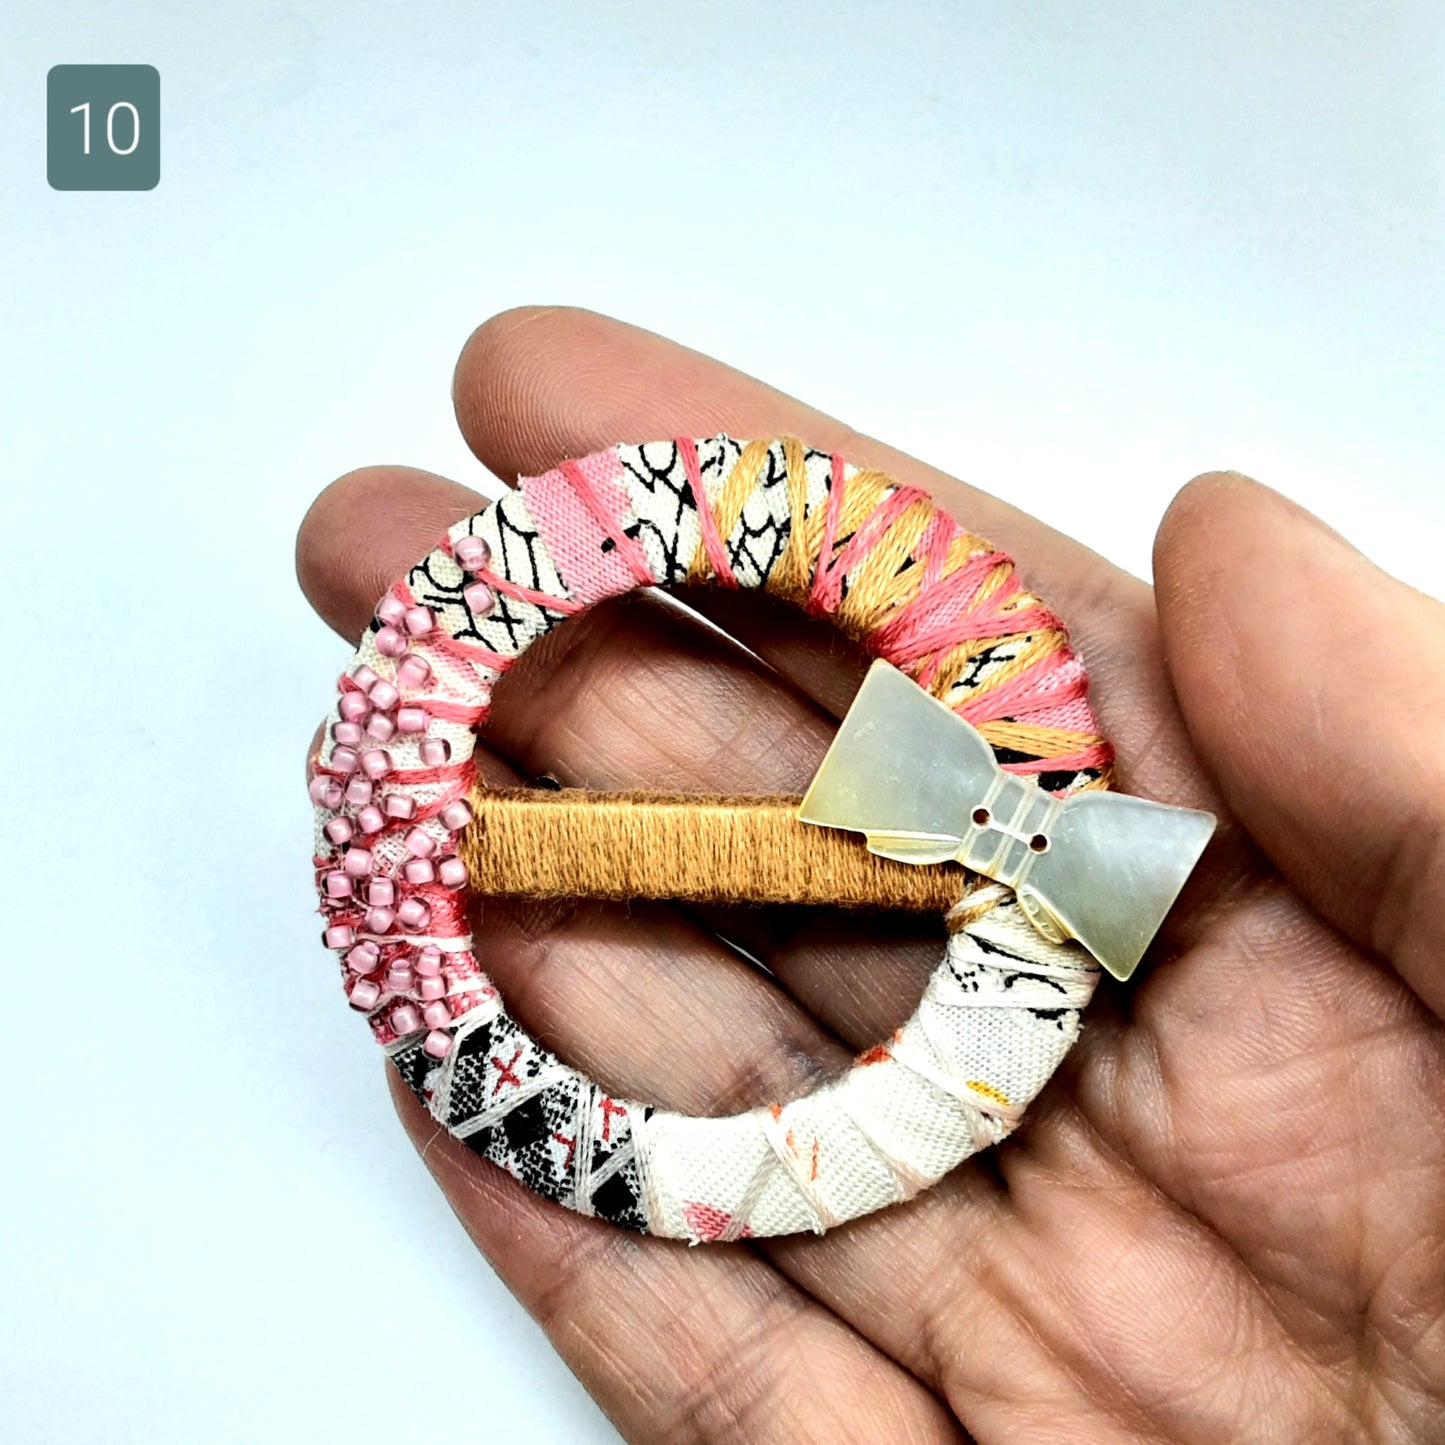 Hand holding cream and pink textile statement brooch. Background is white.